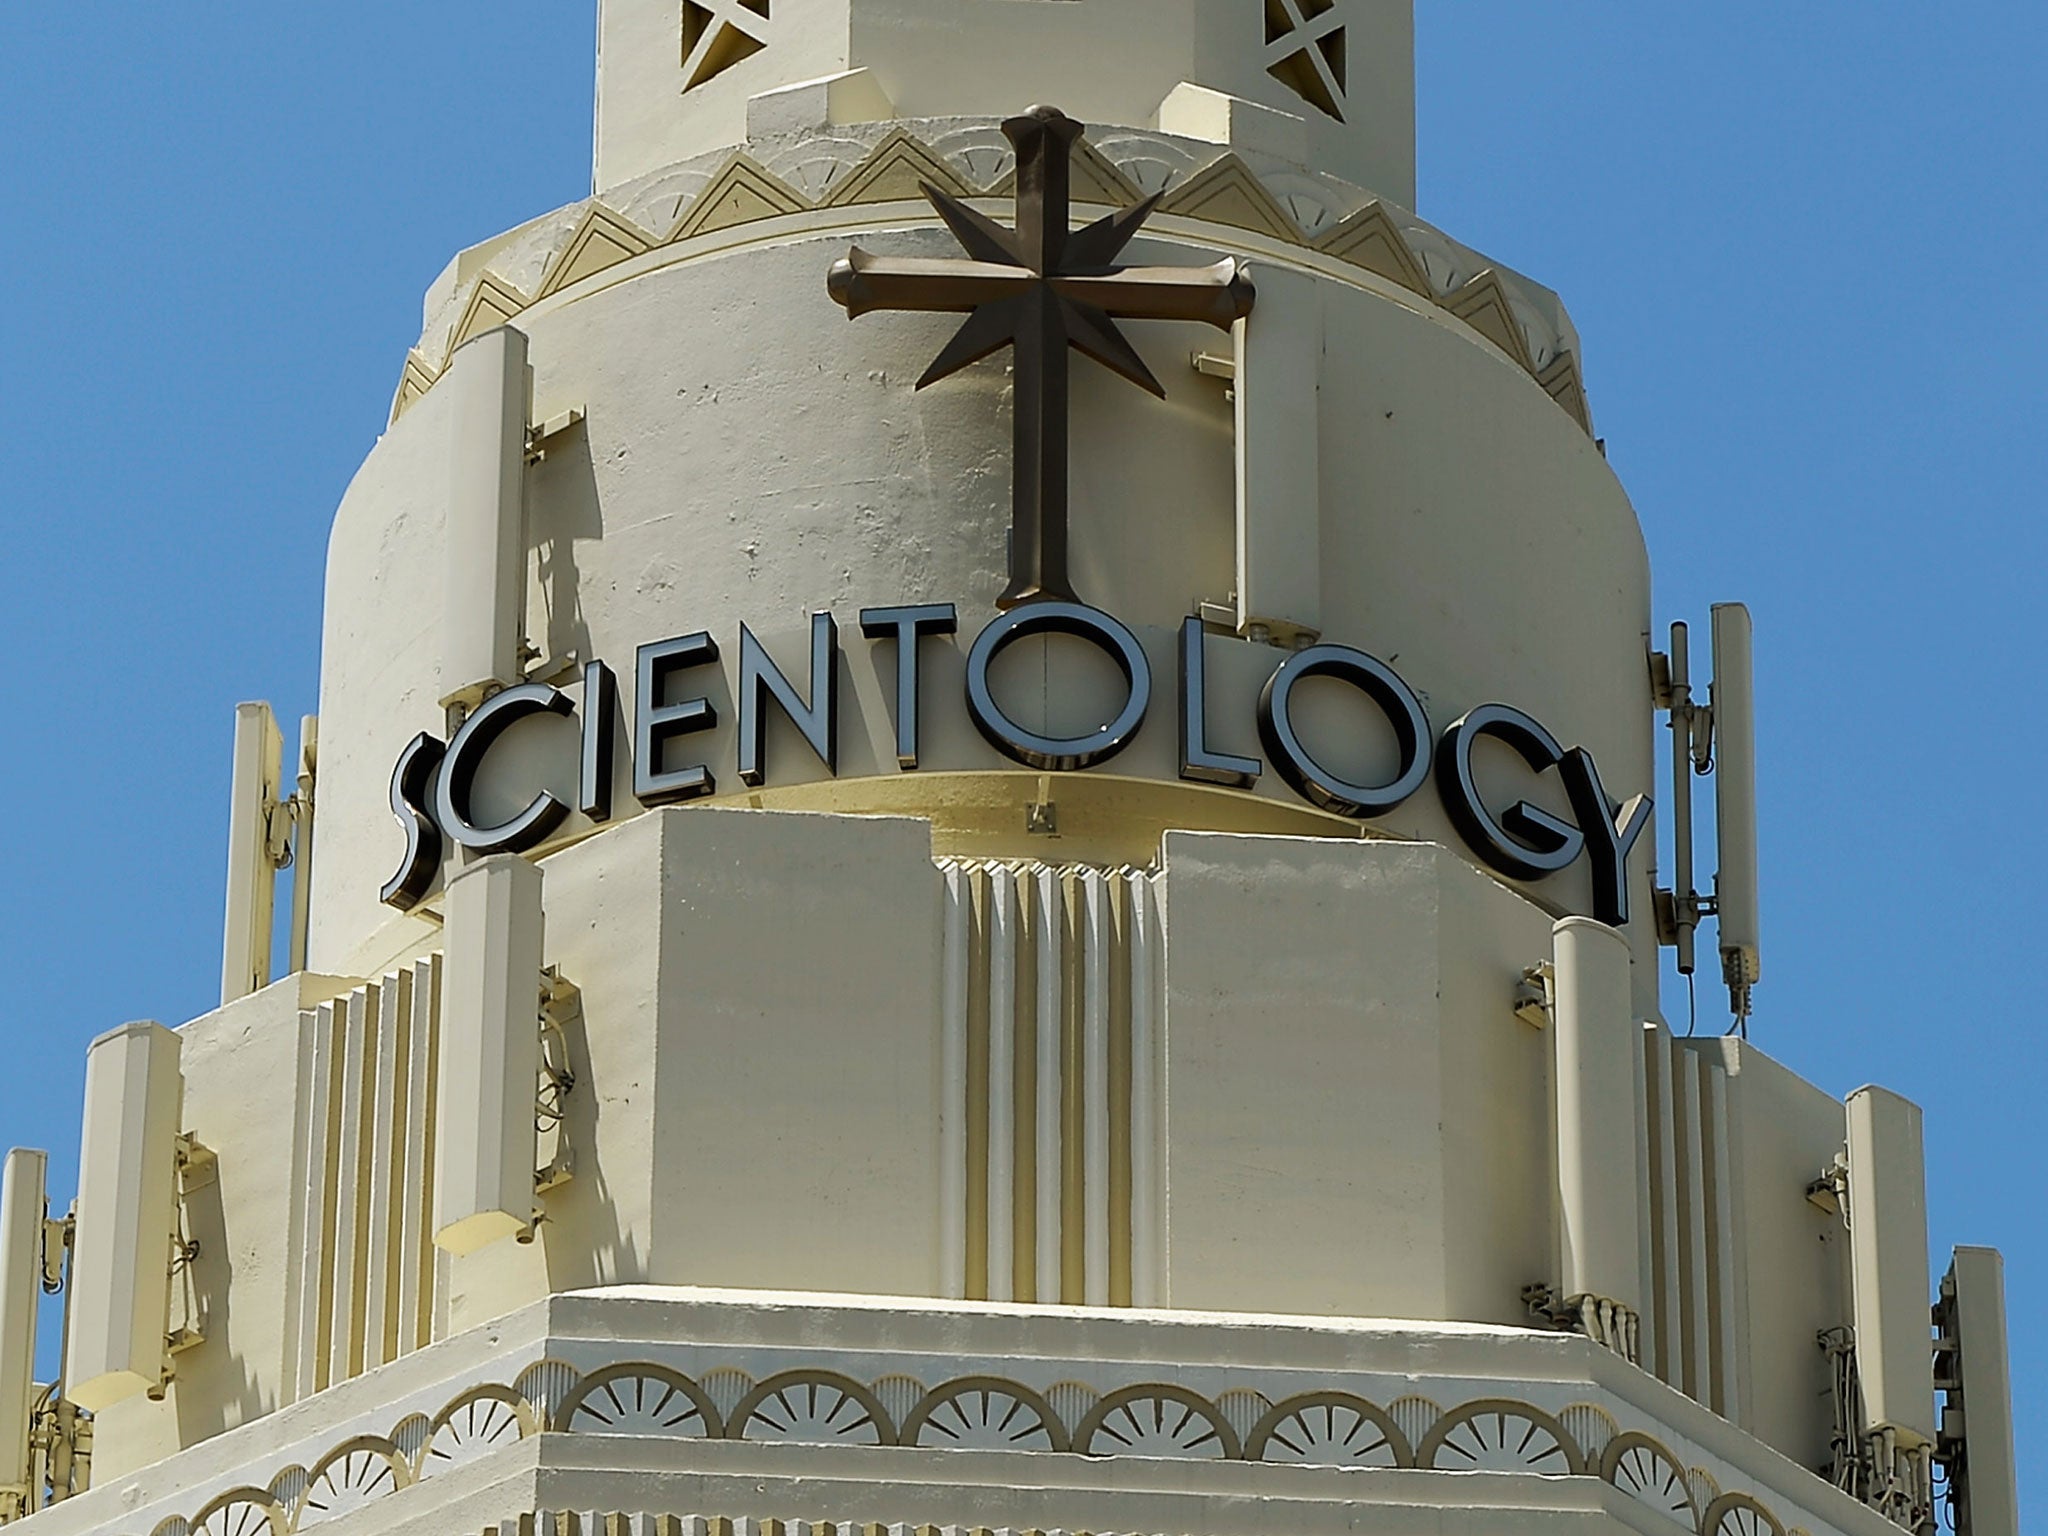 Church of Scientology fined £14,000 for leaking sewage into Sussex river